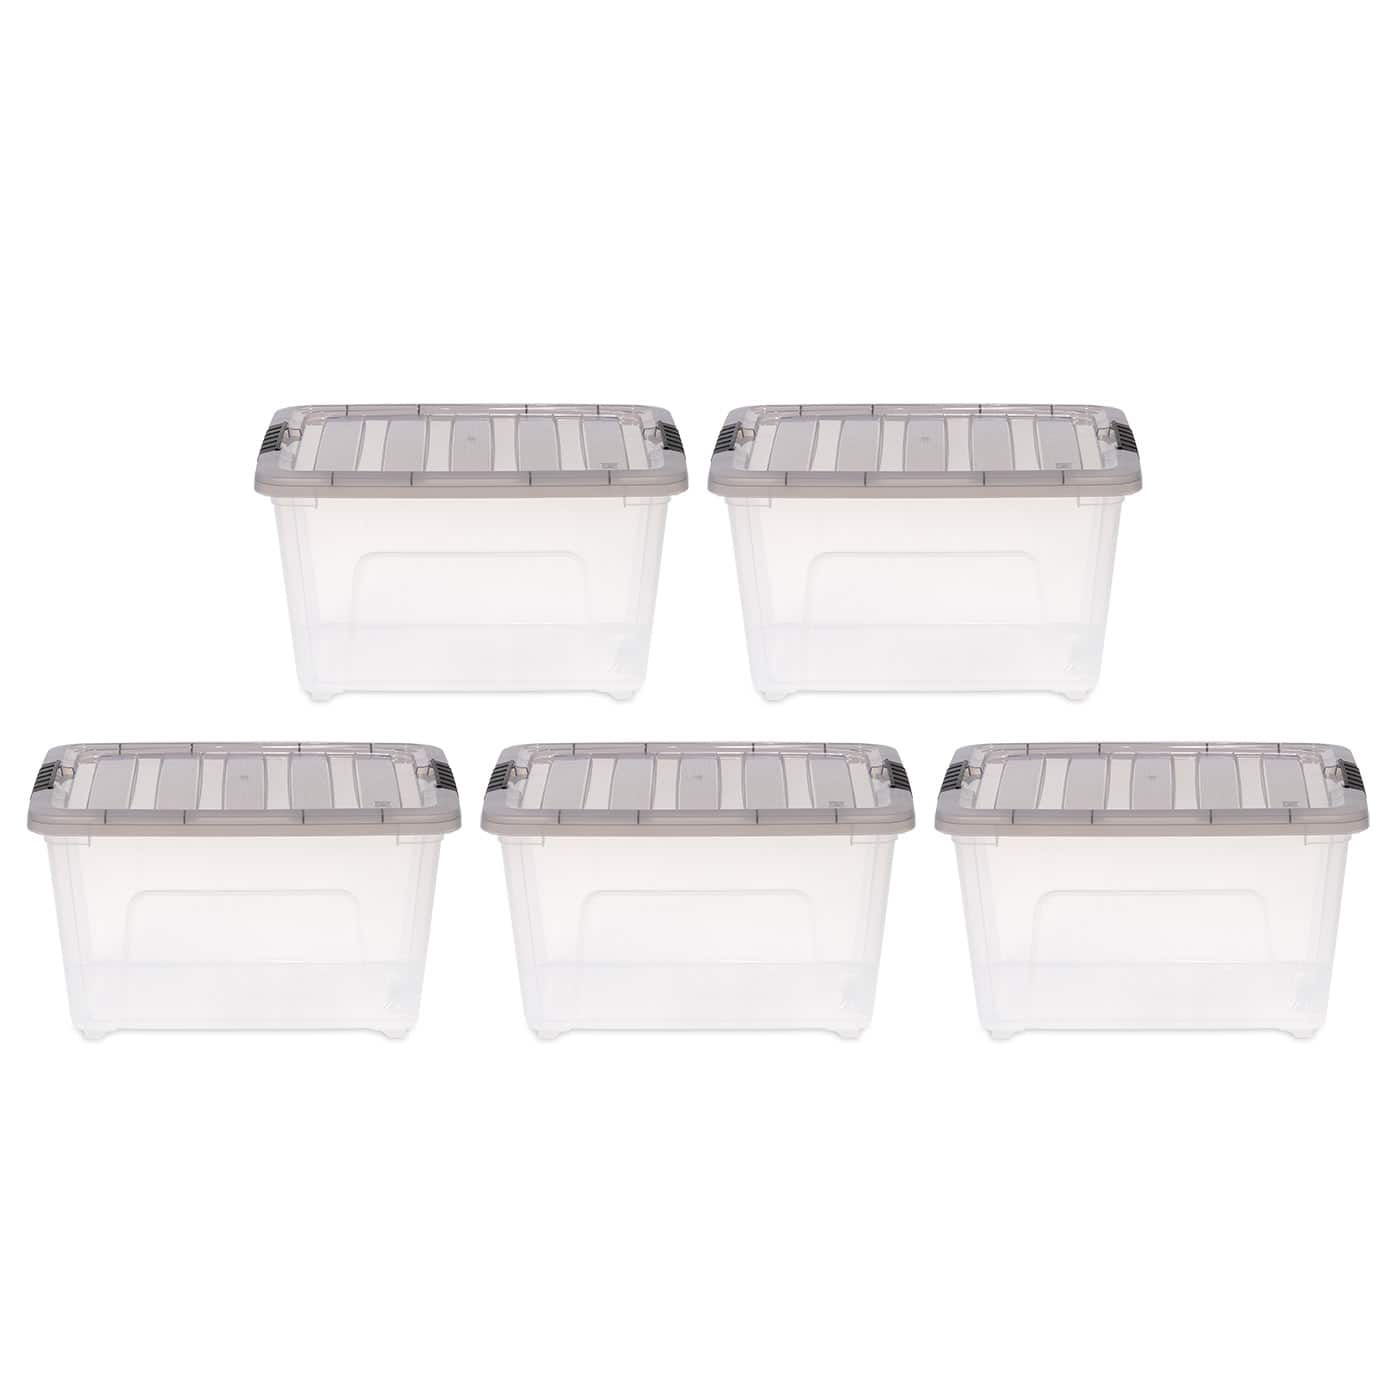 IRIS USA 2 Pack 76qt/19Gal Heavy Duty Plastic Storage Bins Container with  Lid and Secure Latching Buckles